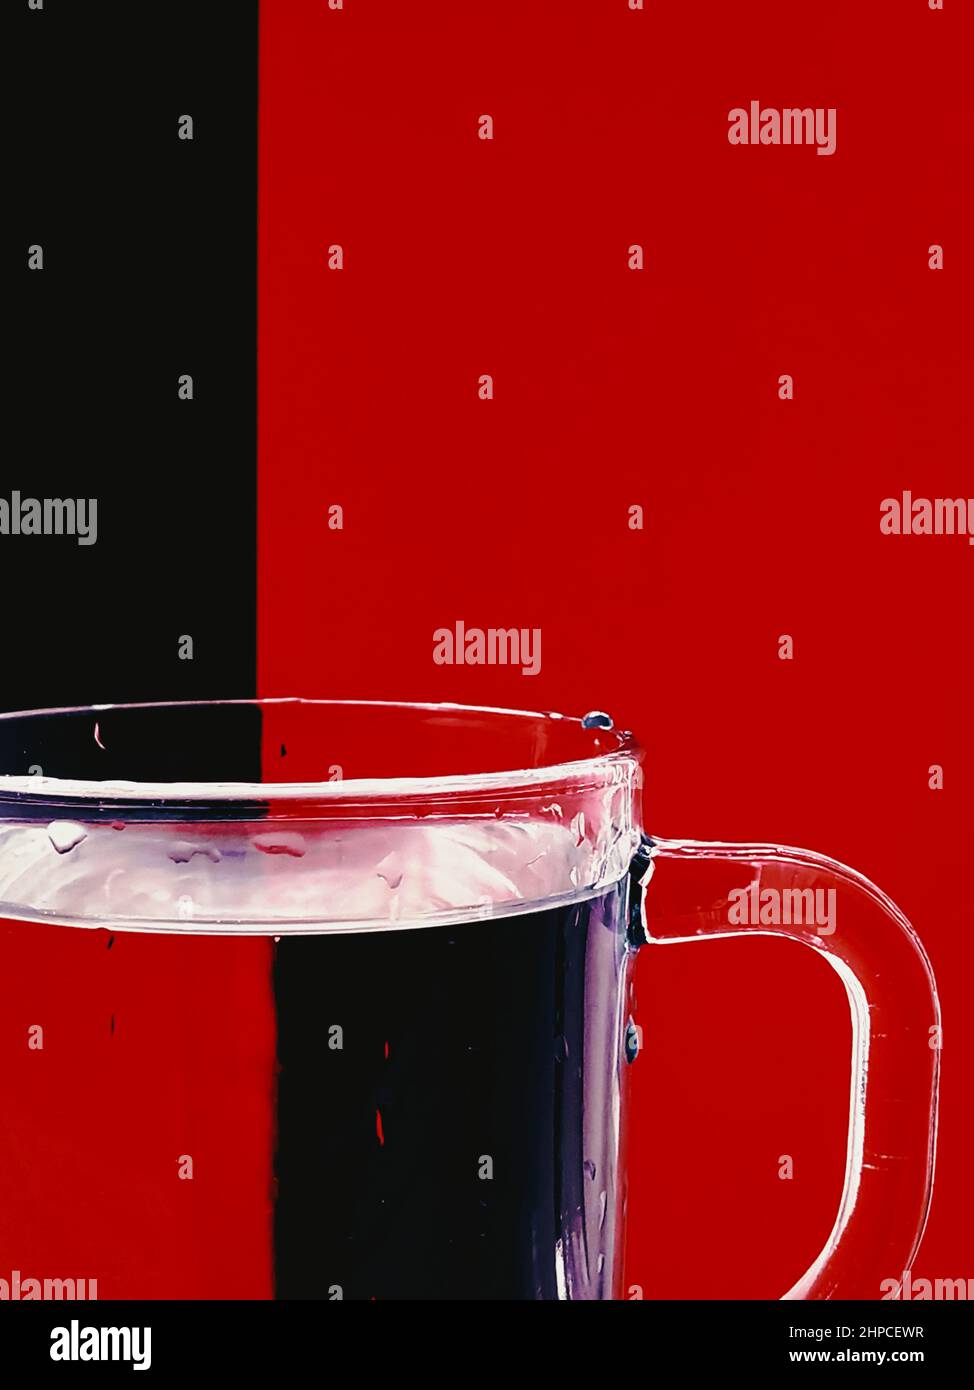 cup of water. red and black visual illusion Stock Photo